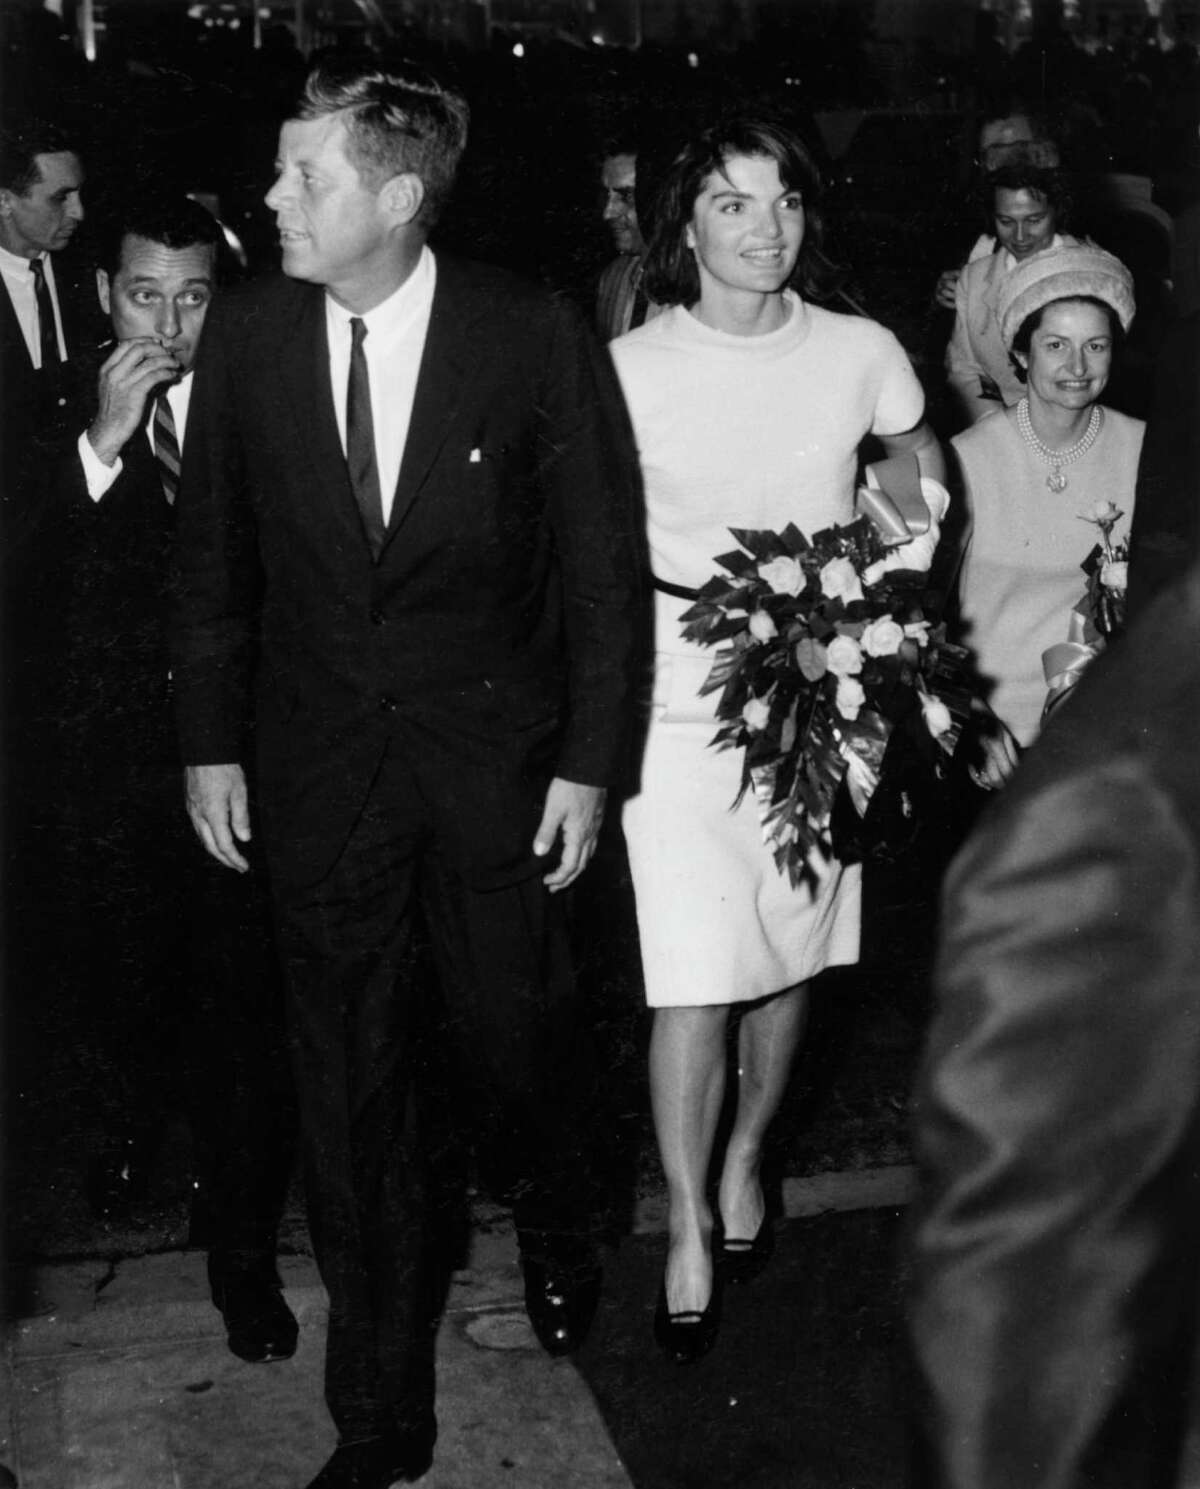 Thursday marks the anniversary of President John F. Kennedy's visit to Houston the night before he was shot and killed in Dallas. >>>You can see dozens of photos from his stop at the Rice Hotel in downtown Houston. 